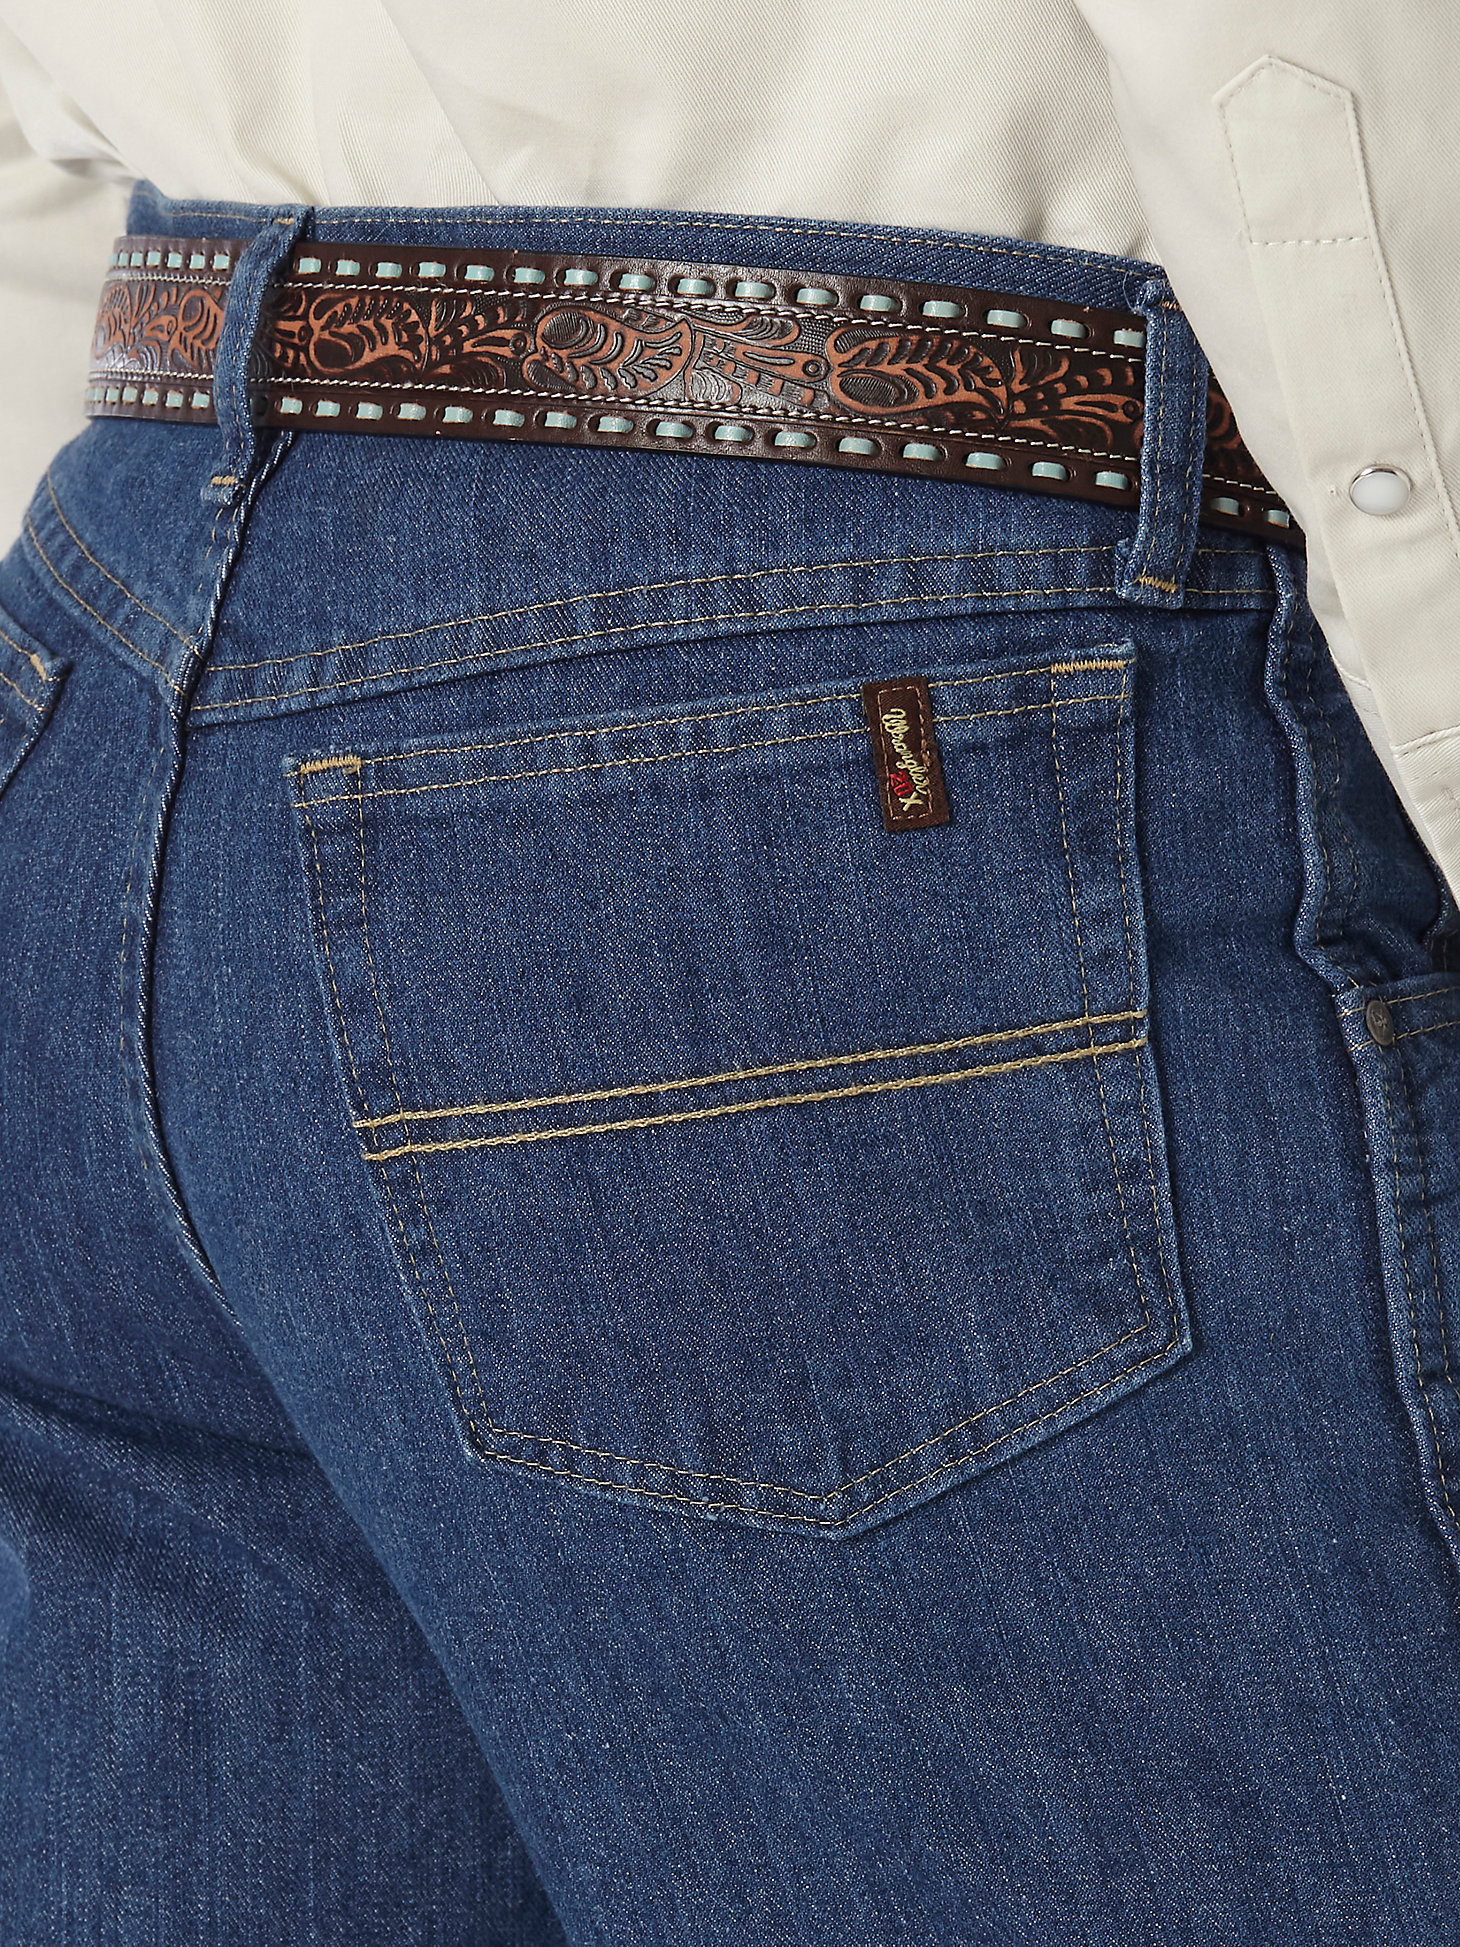 Wrangler® 20X® No. 23 Relaxed Fit in Vintage Blue alternative view 3